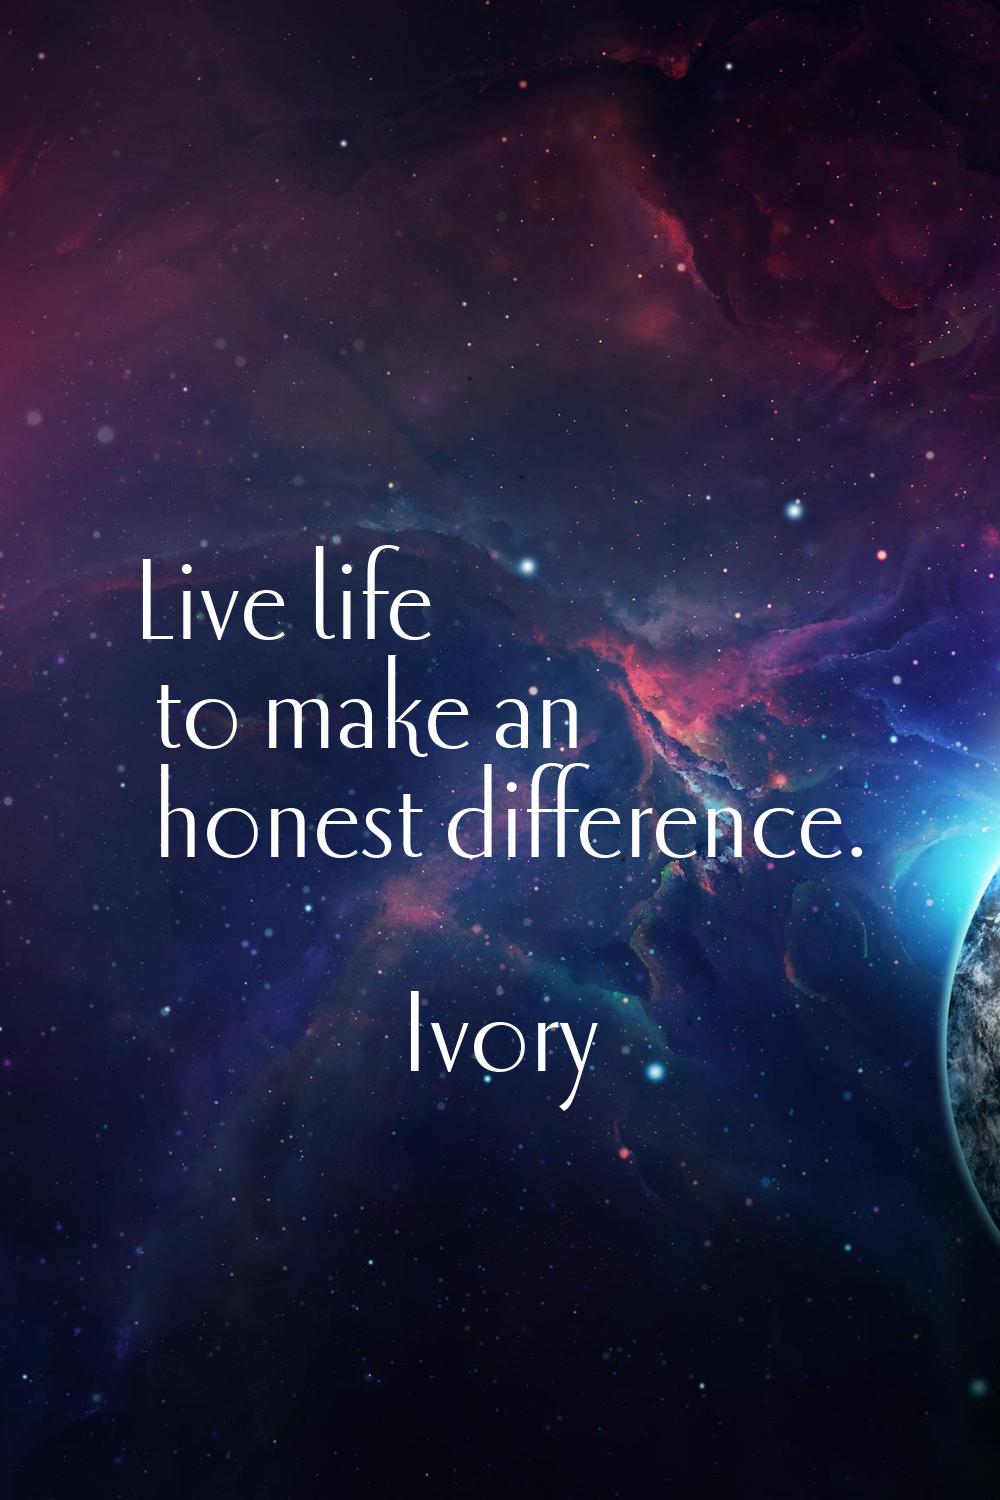 Live life to make an honest difference.